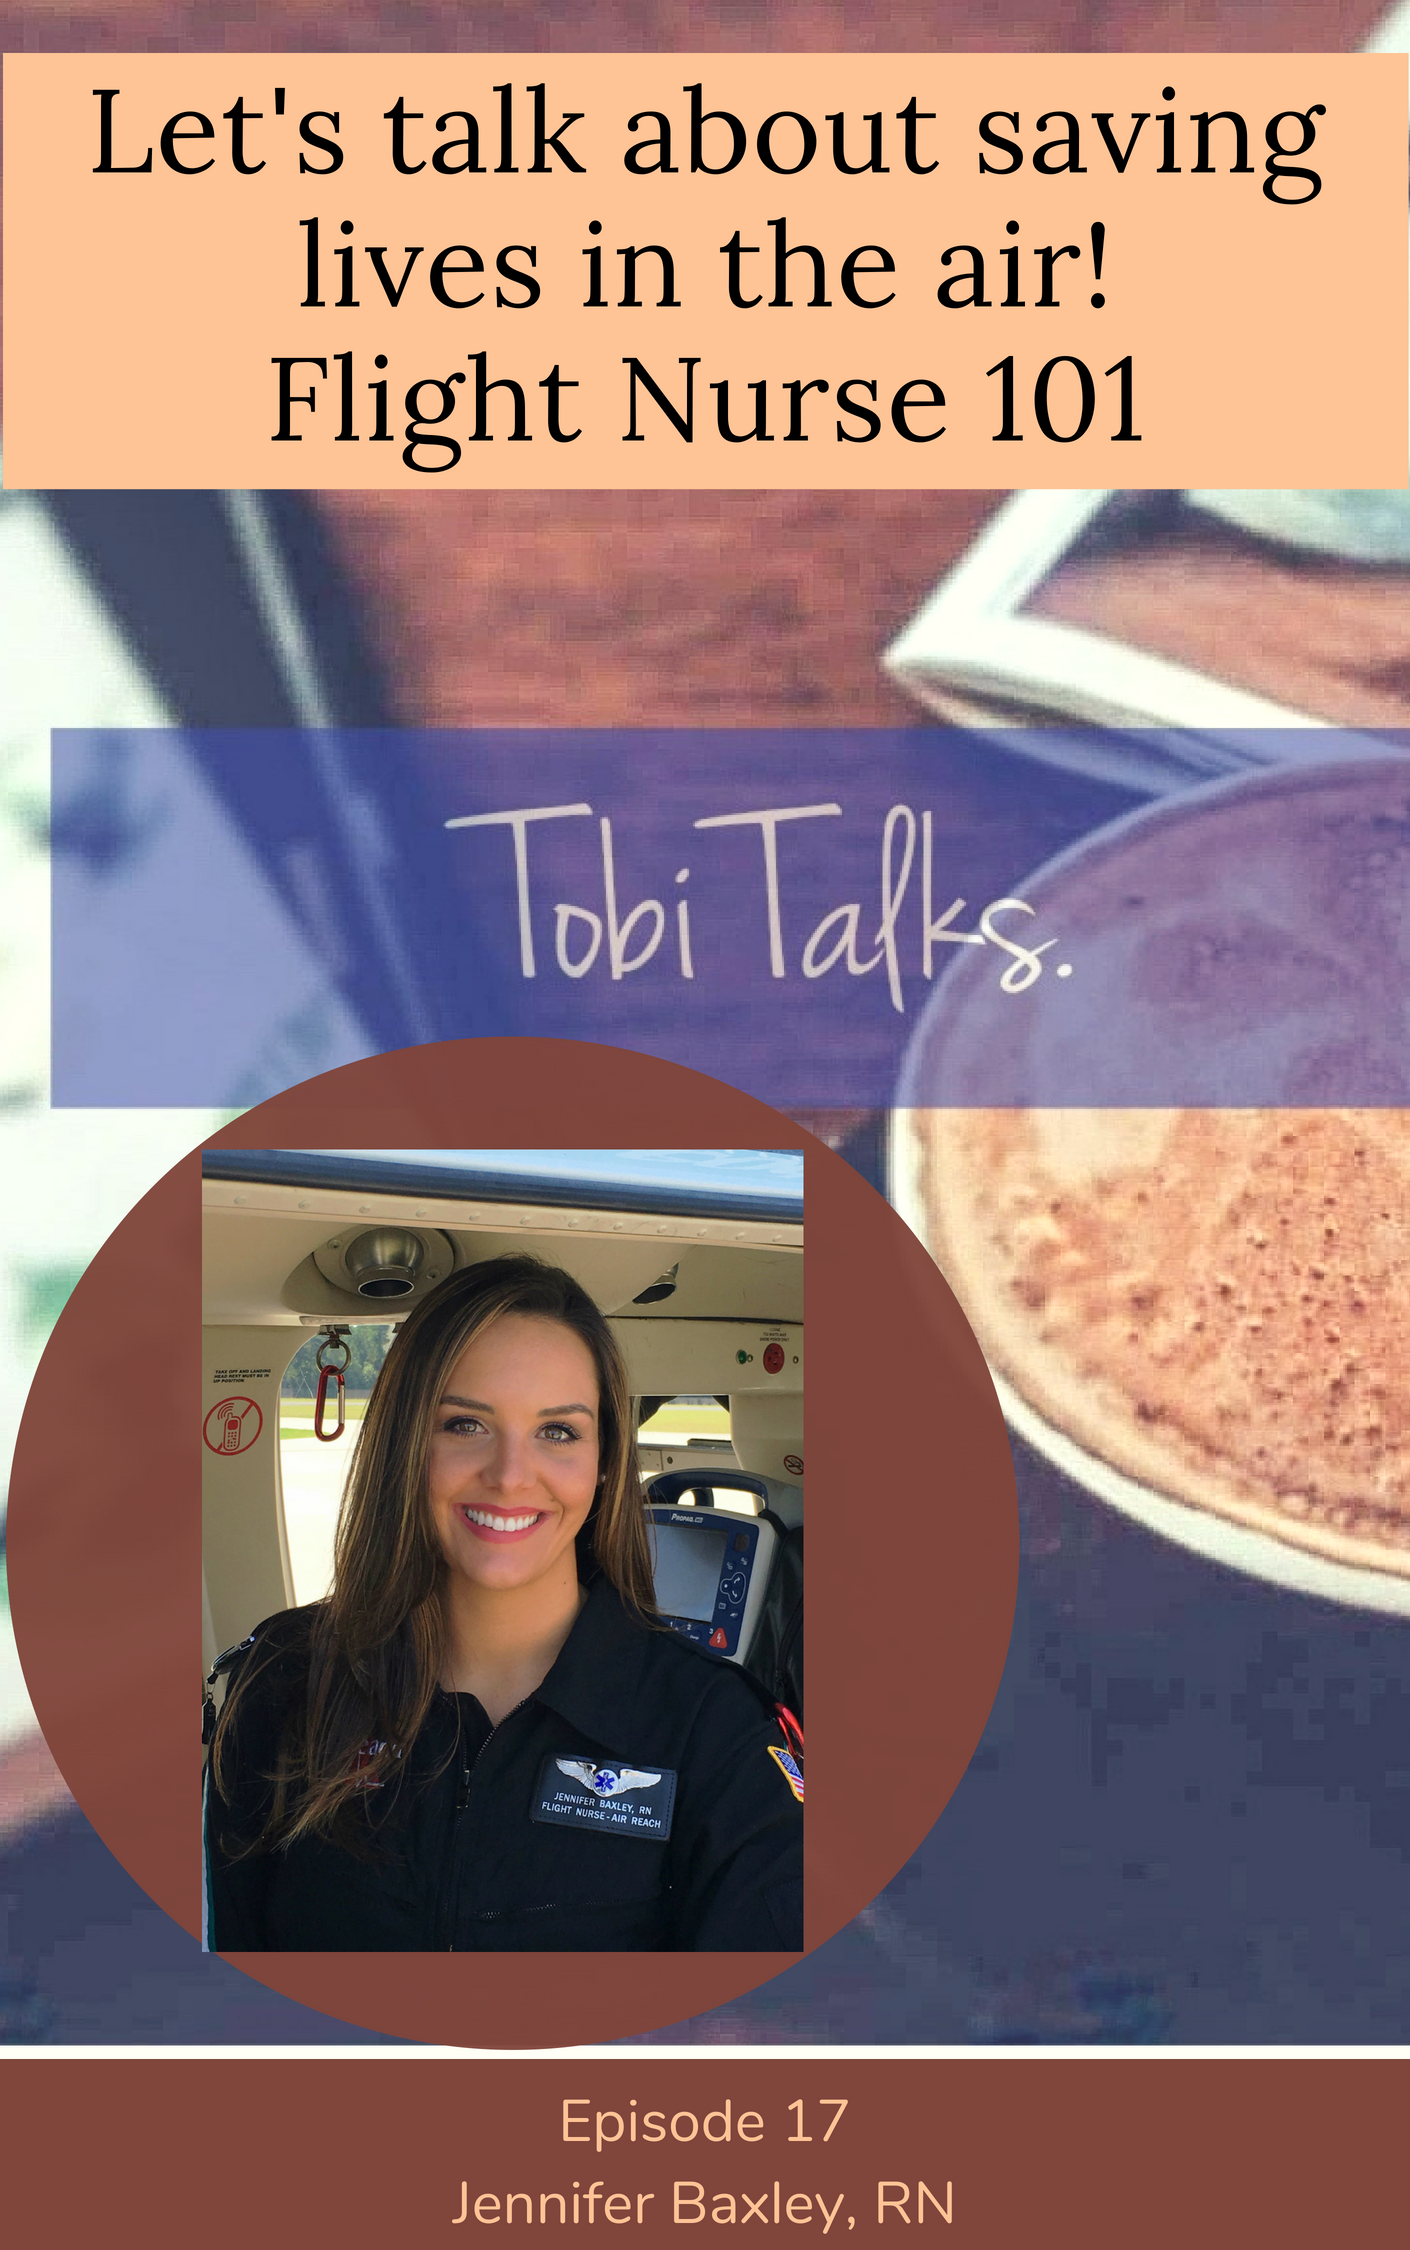 Let's talk about saving lives in the air! Flight Nurse 101